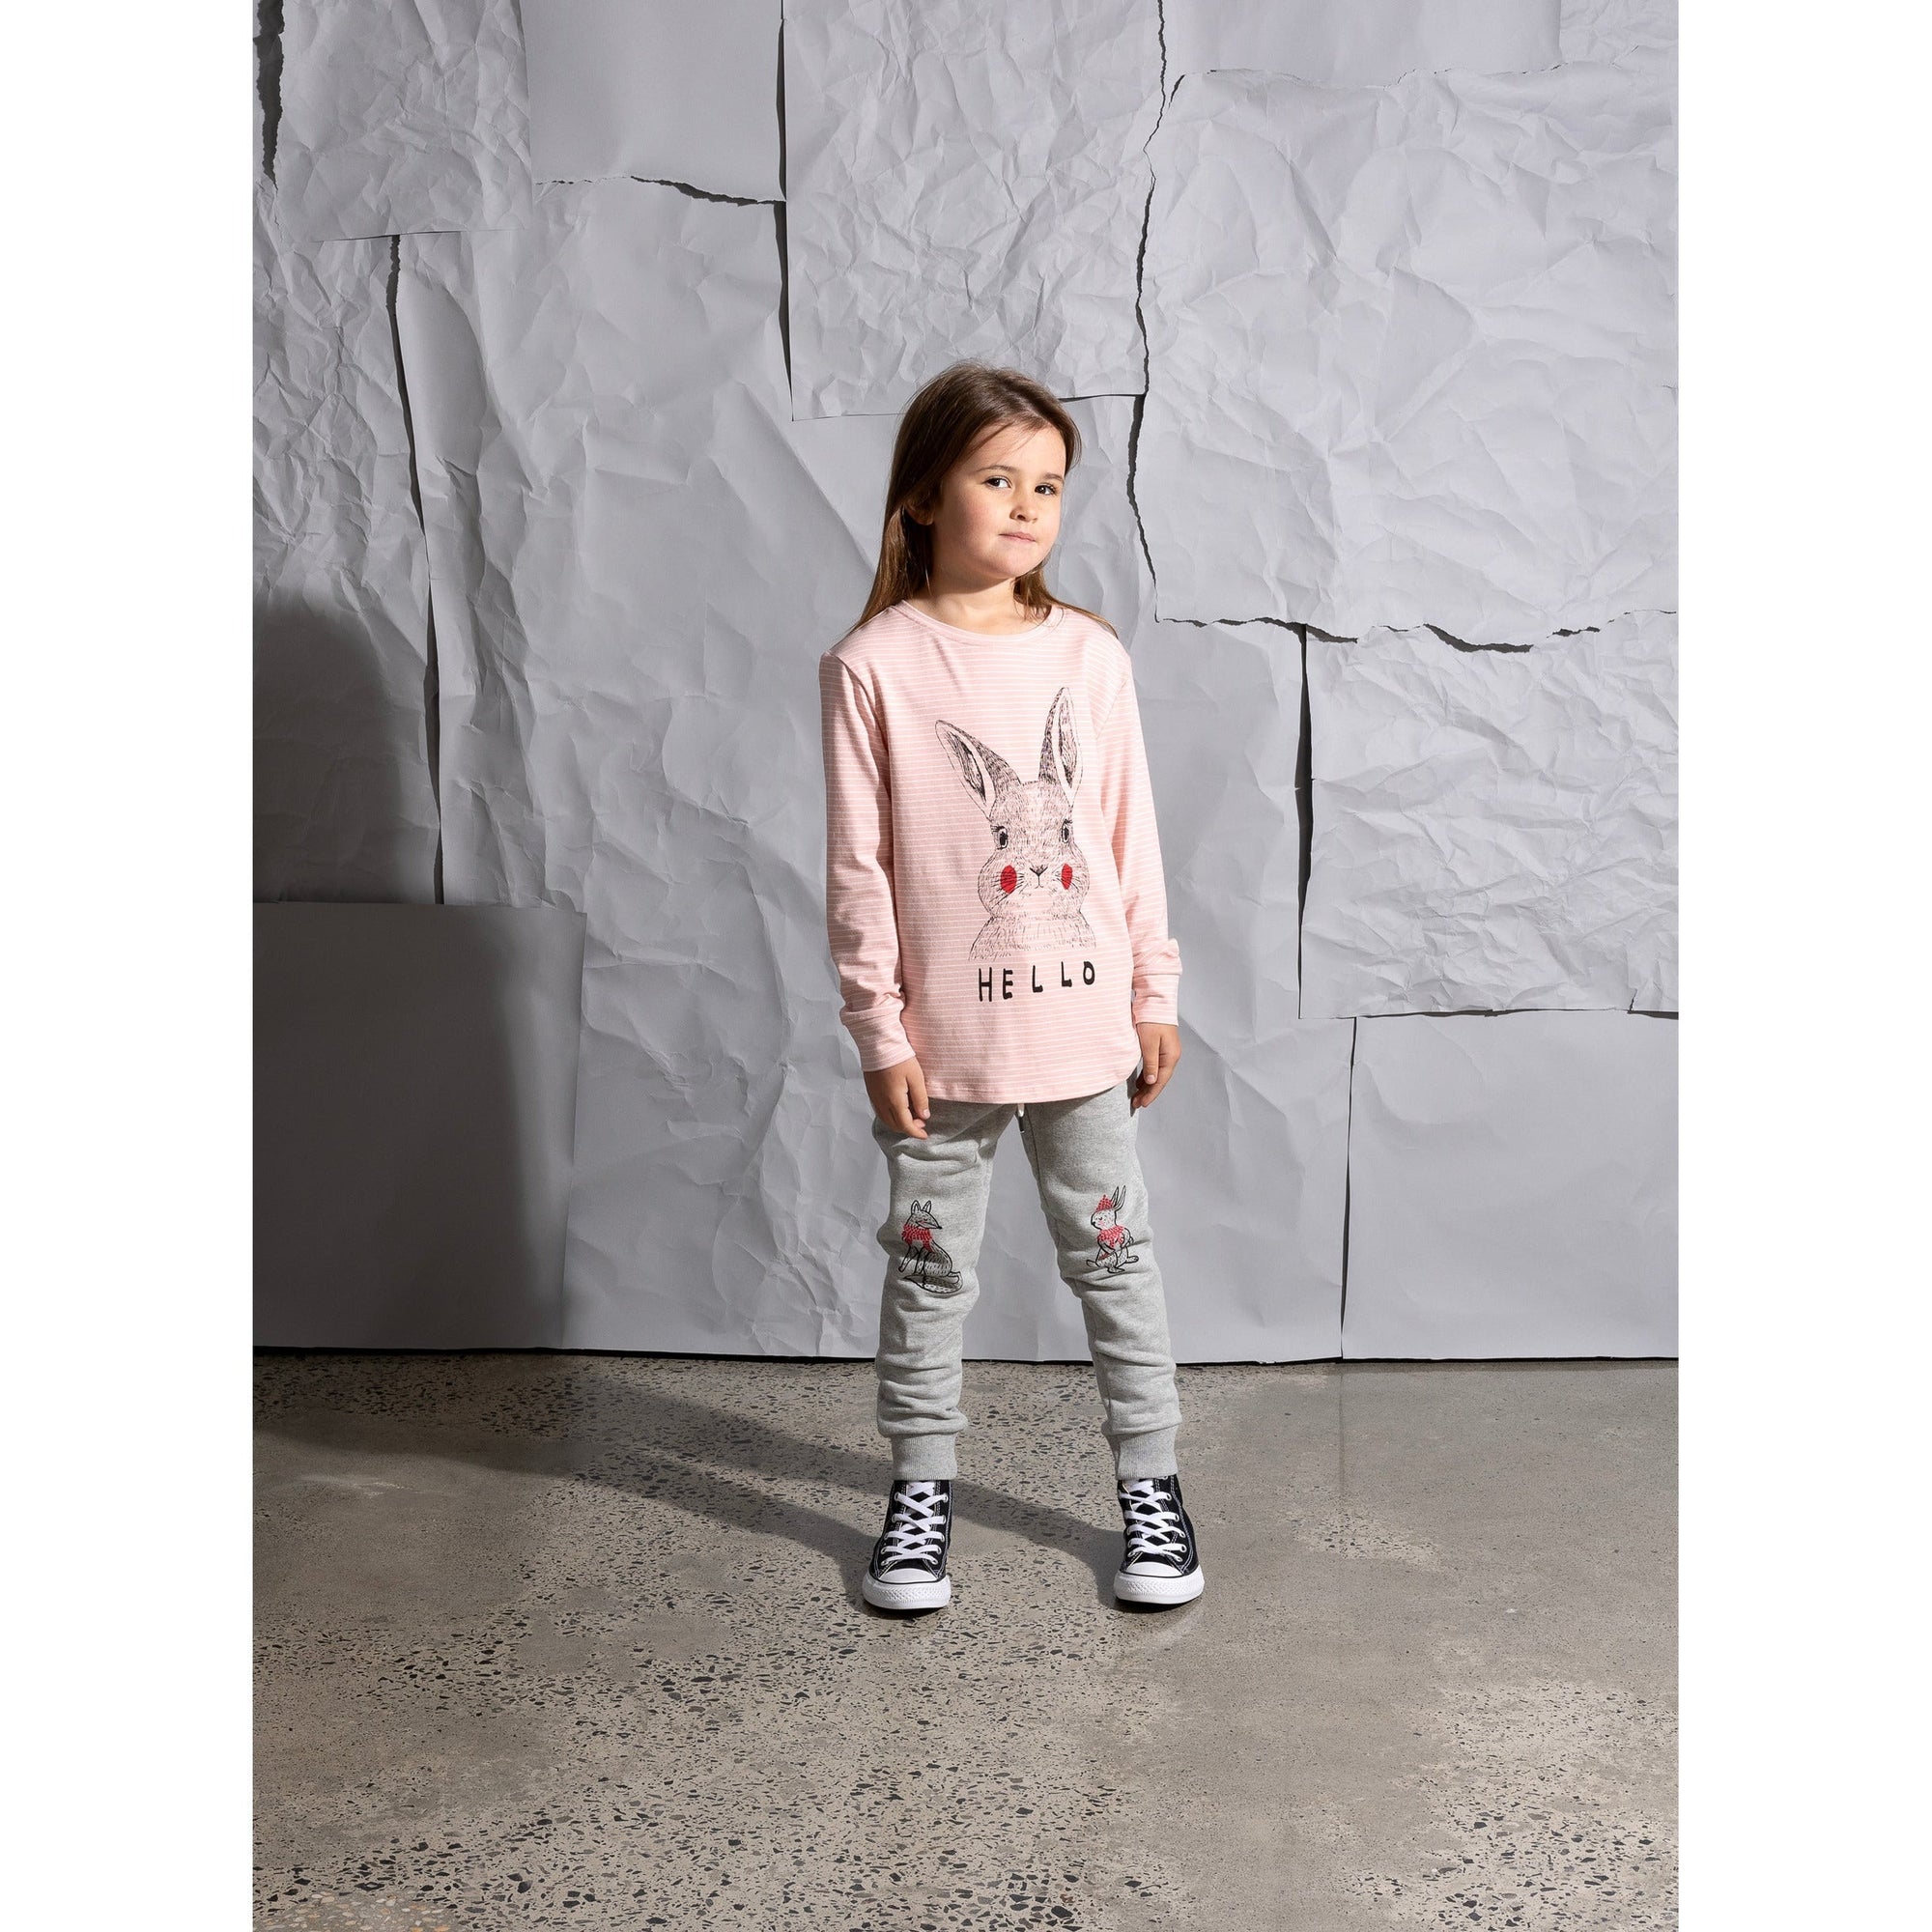 Warm Forest Friends Furry Trackies - Grey Marle